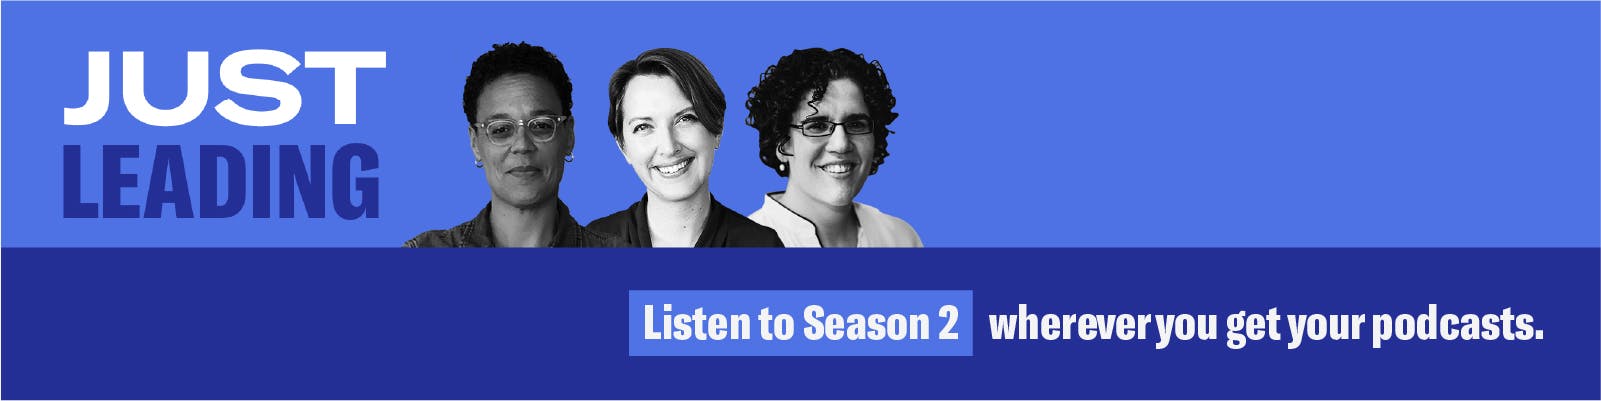 Just Leading: Listen to Season 2 wherever you get your podcasts.